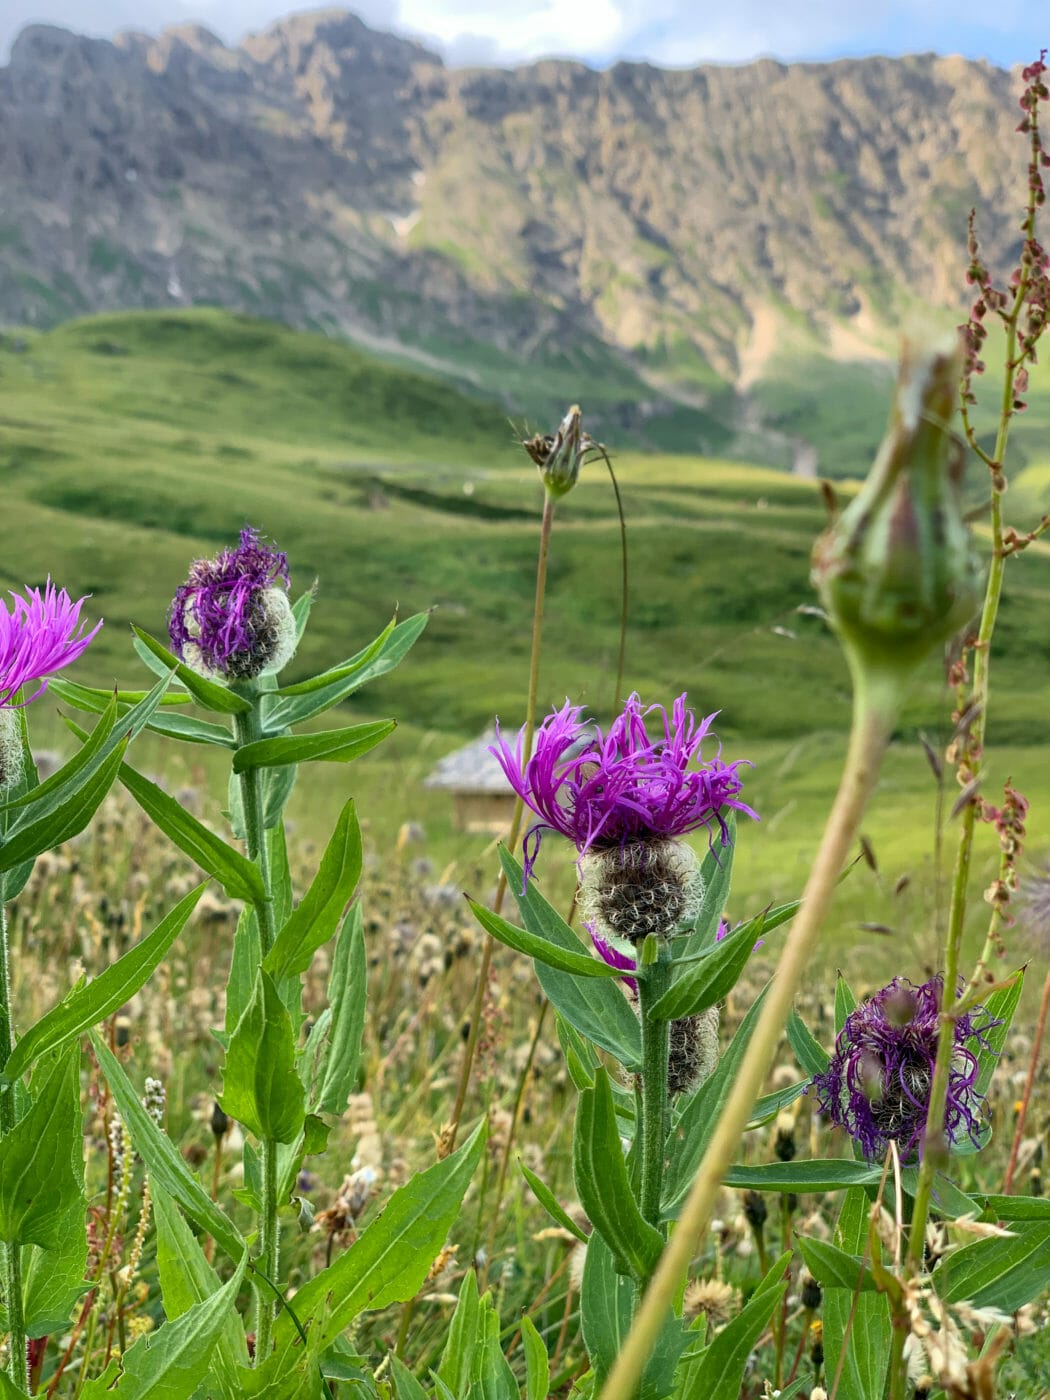 pink alpine flowers with the dolomite mountains in the background in Alpe di Siusi